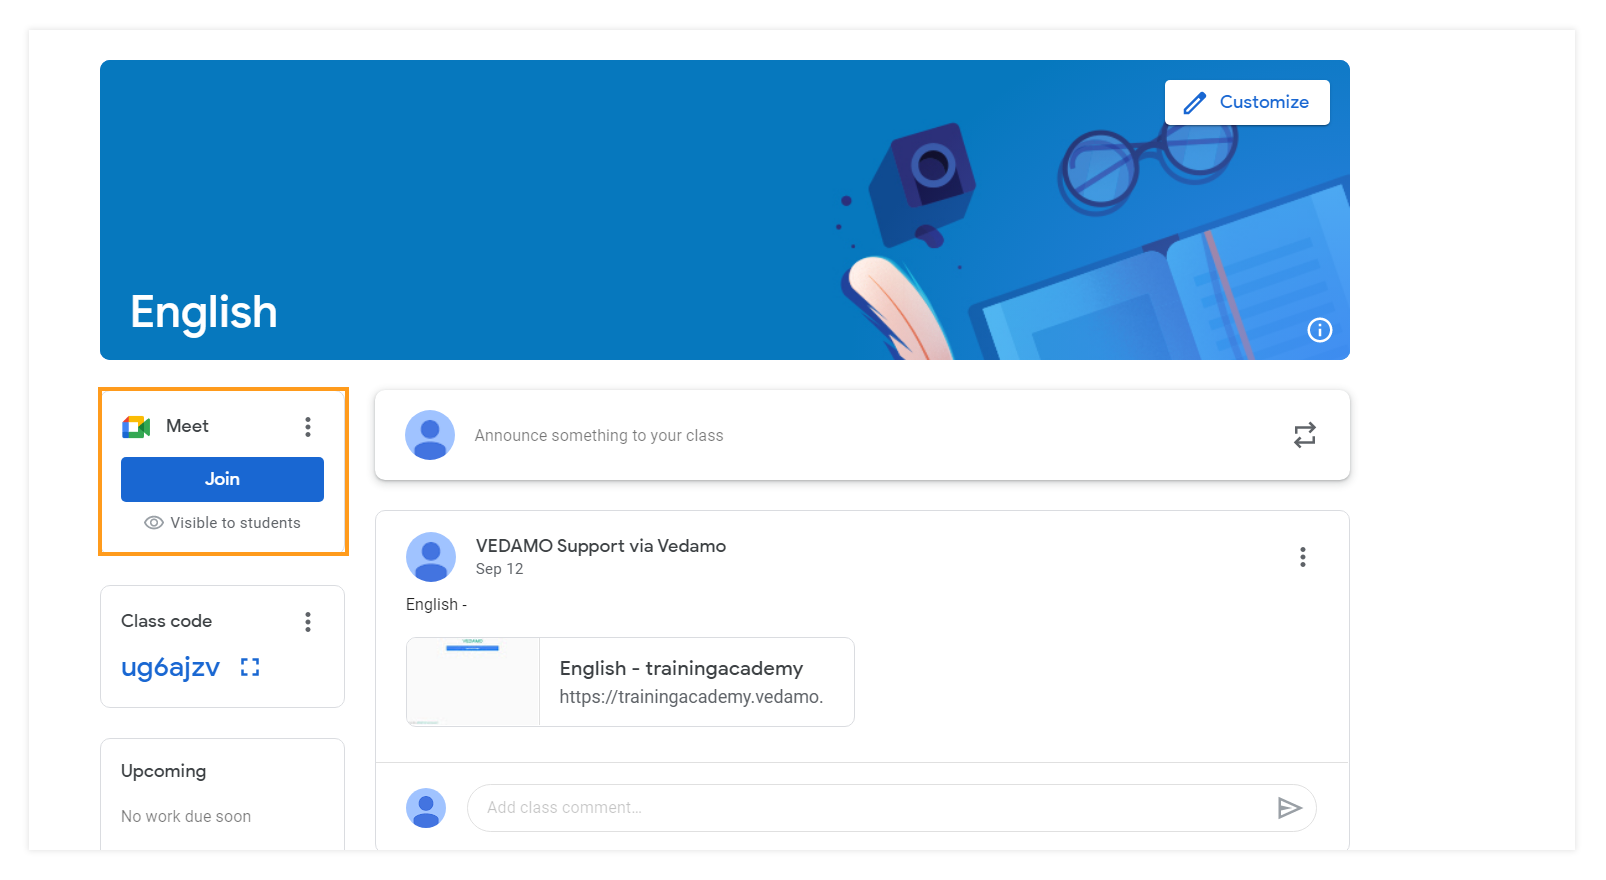 Permanent Links in the VEDAMO platform: Students' Google Classroom dashboard